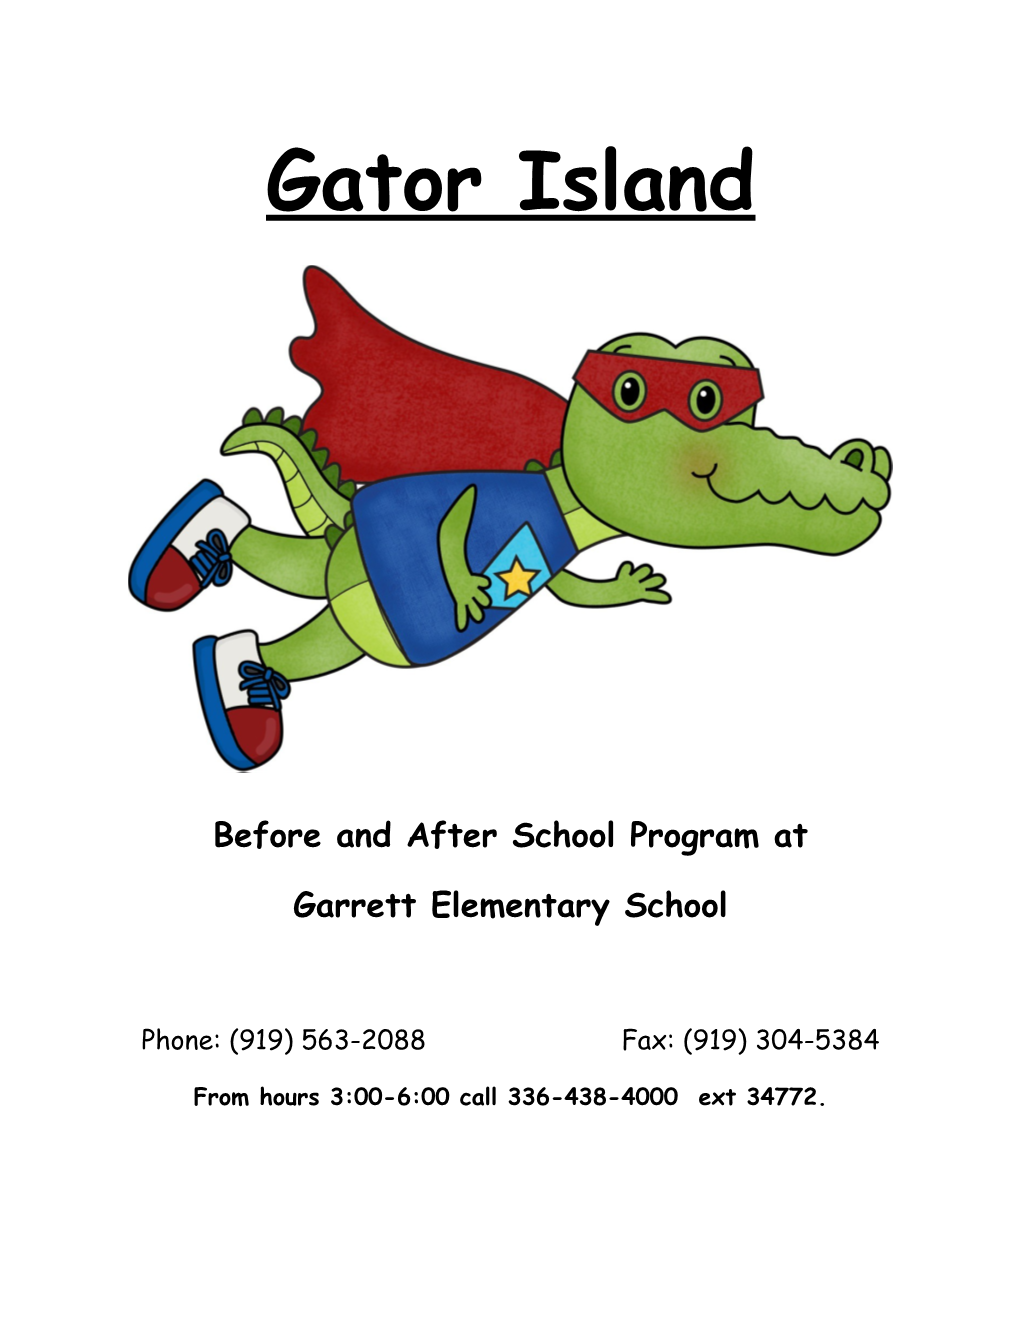 Before and After School Program At